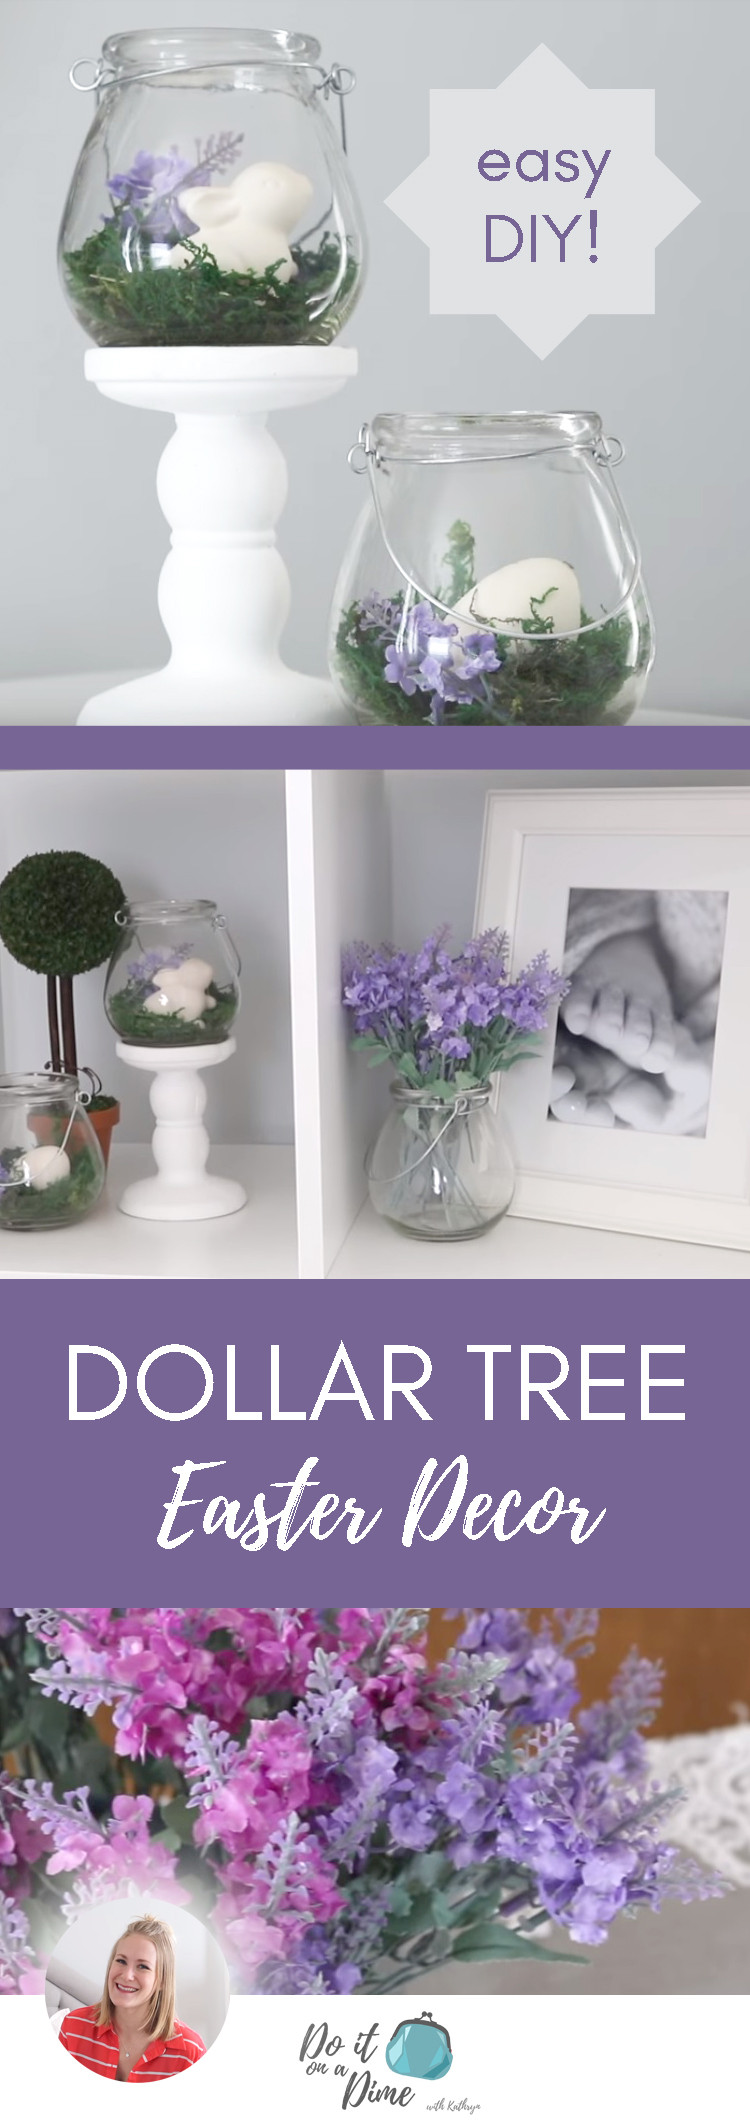 Dollar Tree Easter Crafts
 Amazing Dollar Tree Finds & Easy Easter DIYS